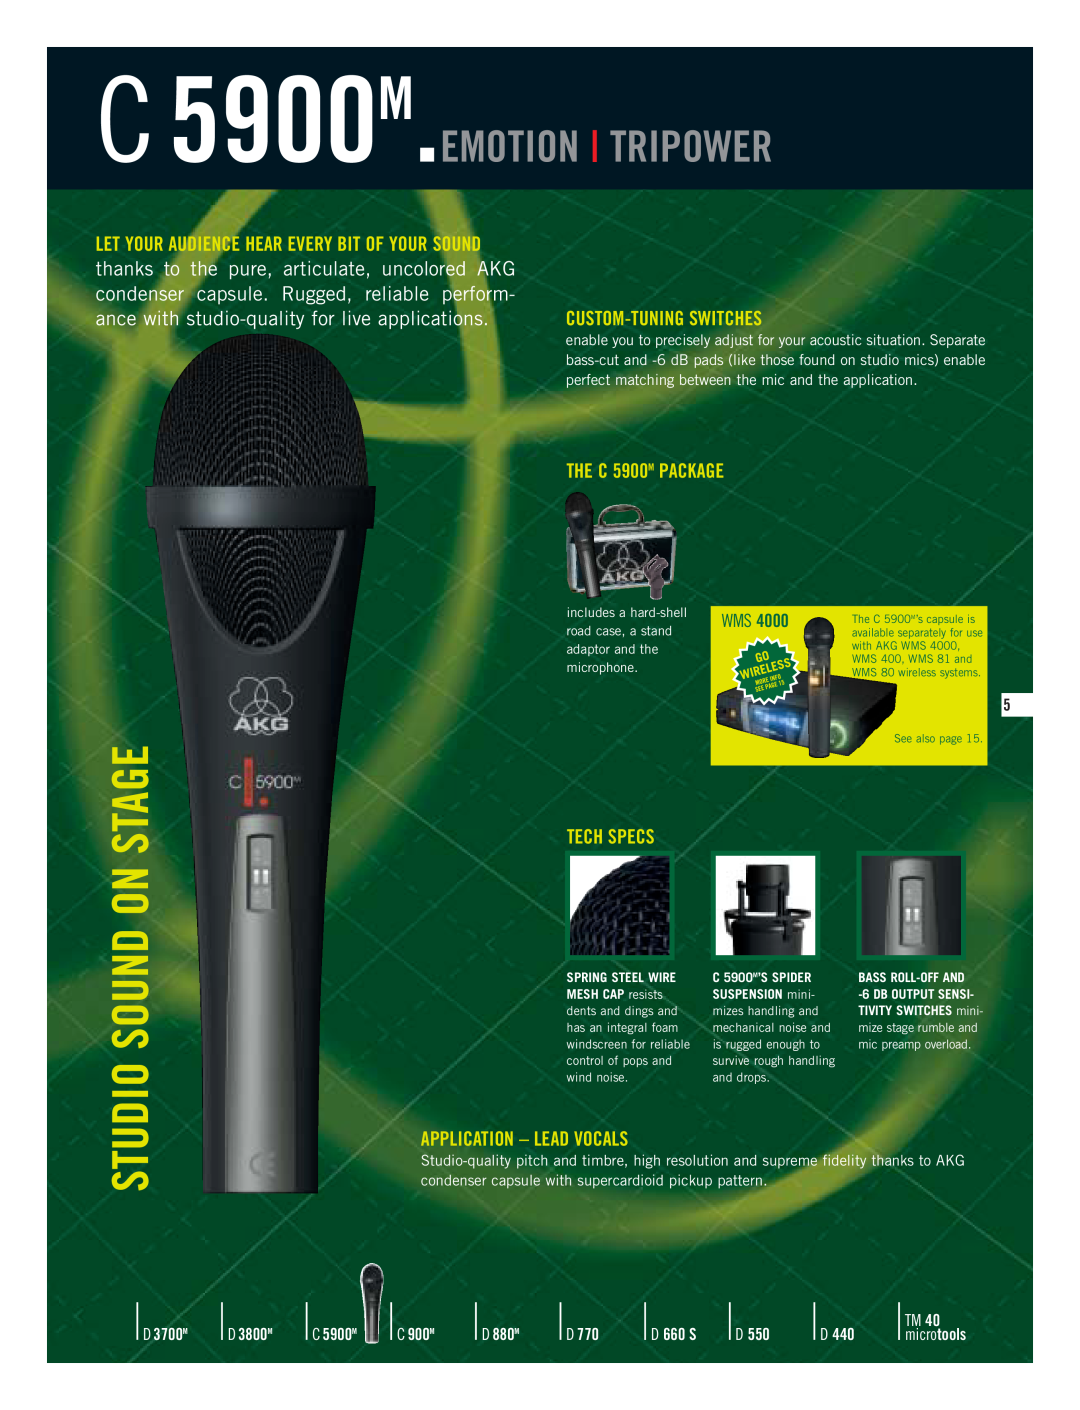 AKG Acoustics D3700M C 5900M.EMOTION TRIPOWER, thanks to the pure, articulate, uncolored AKG, THE C 5900M PACKAGE, D 3700M 